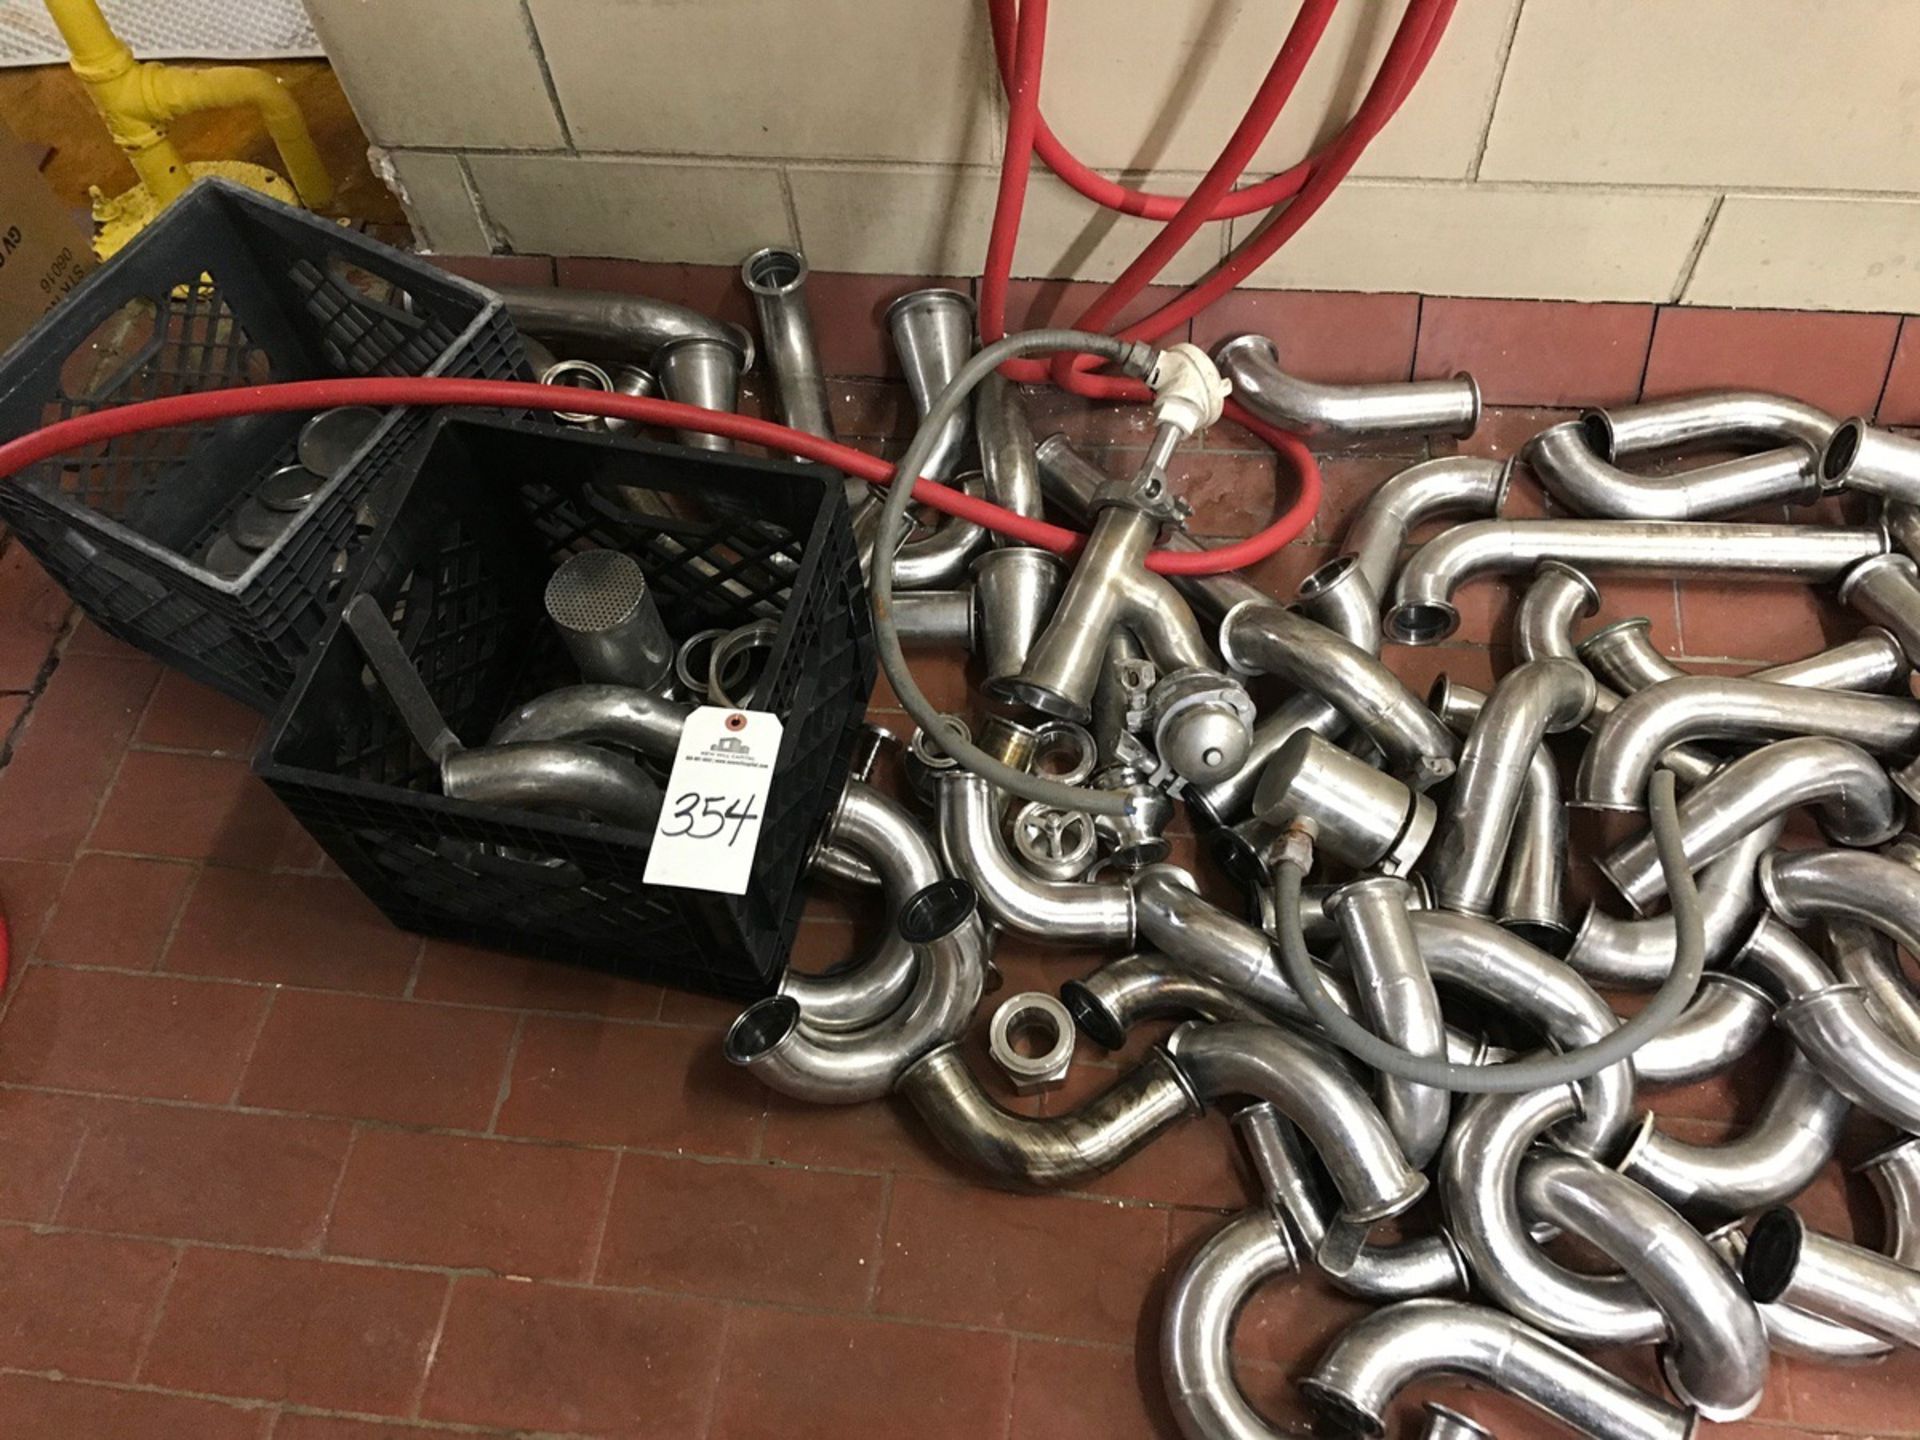 MISCELLANEOUS STAINLESS STEEL PIPE, ELBOWS, TEES, AND STRAIGHTS PLUS HANGERS | Rig Fee $50